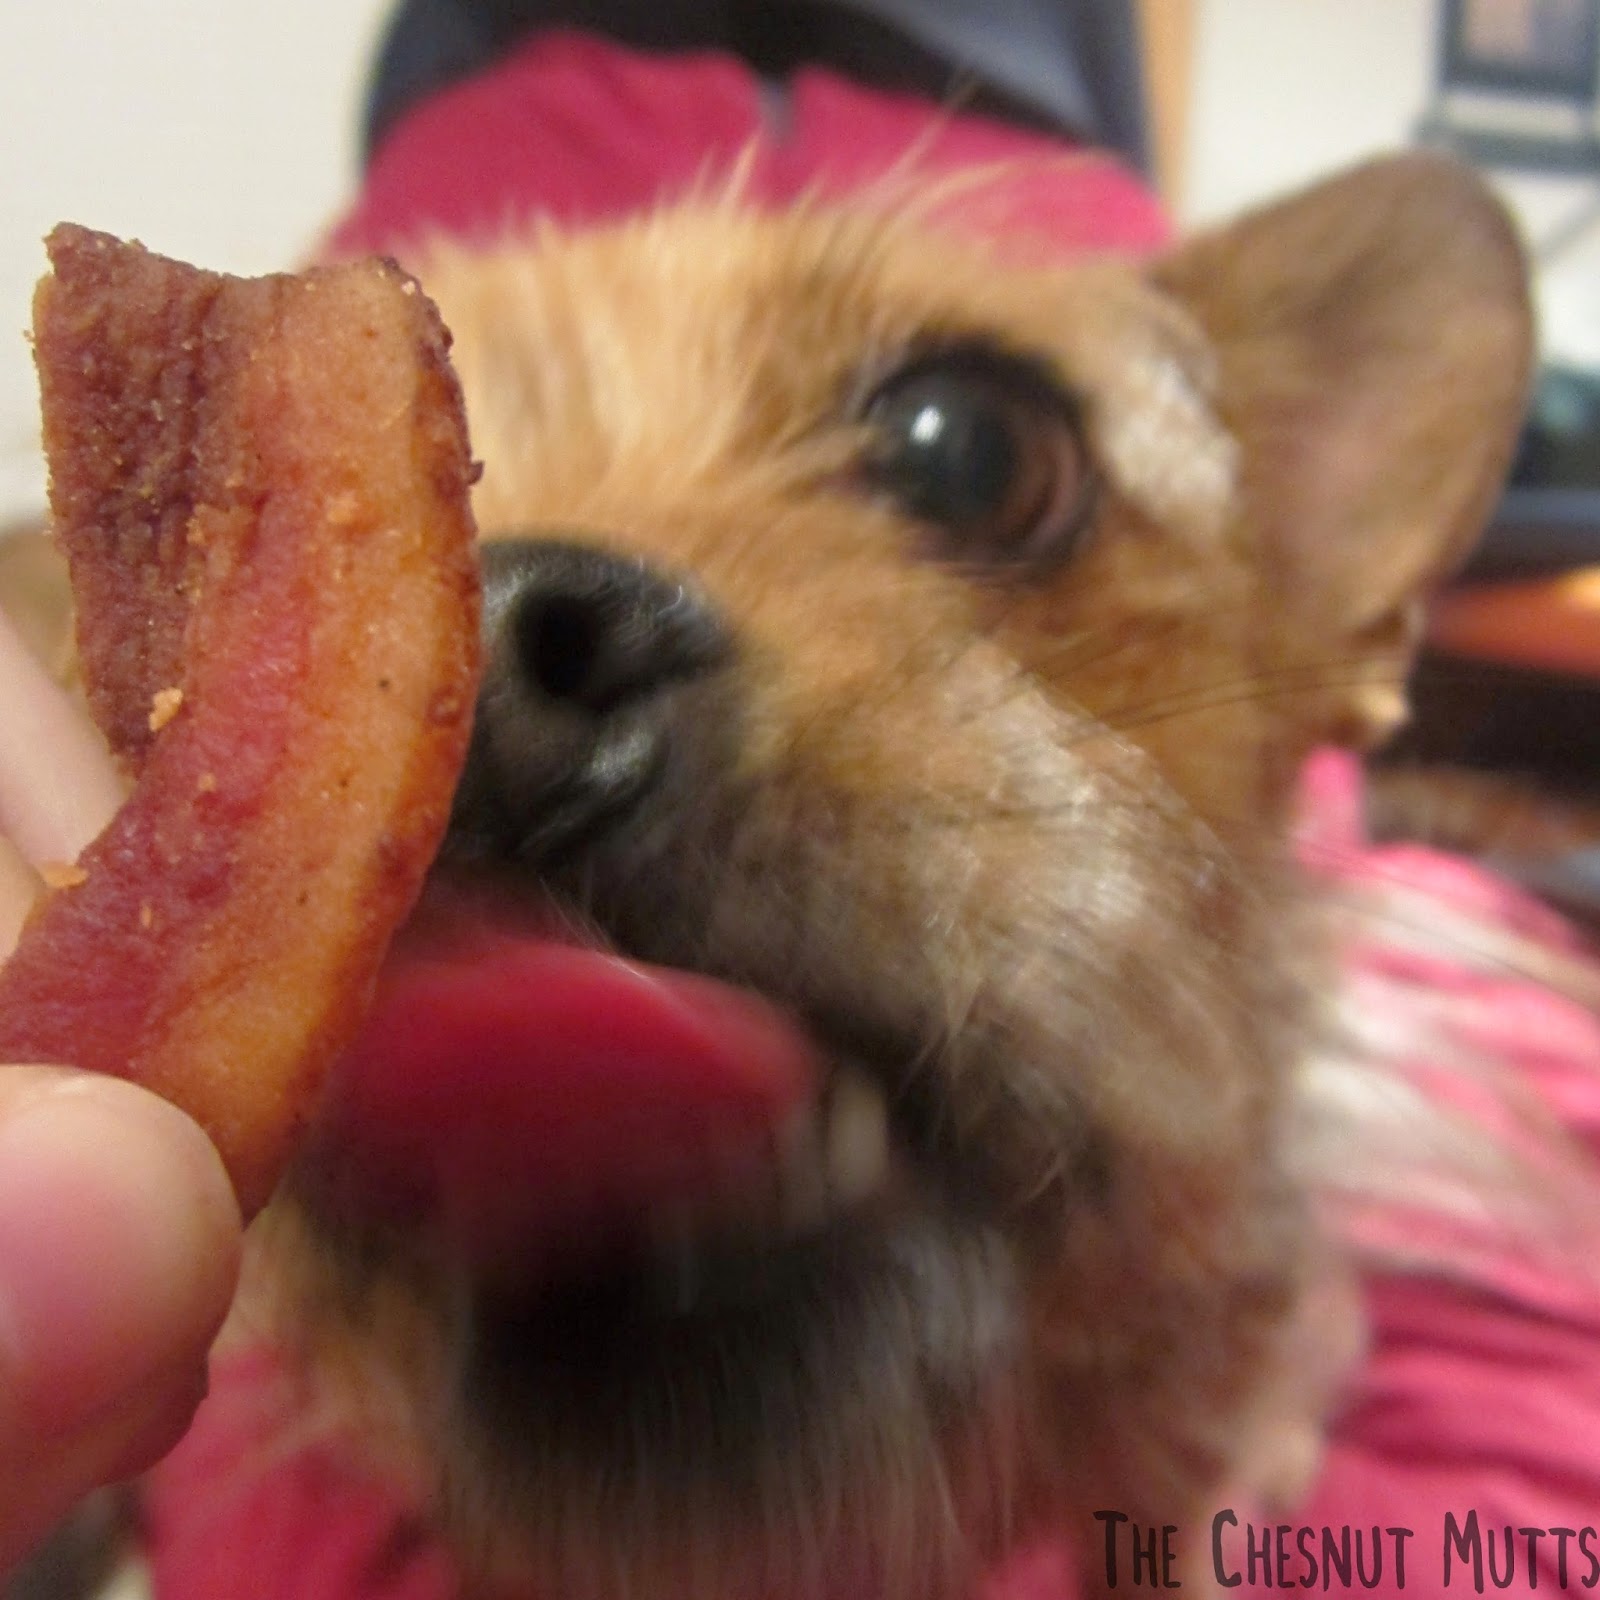 Jada licking a piece of the bacon treat